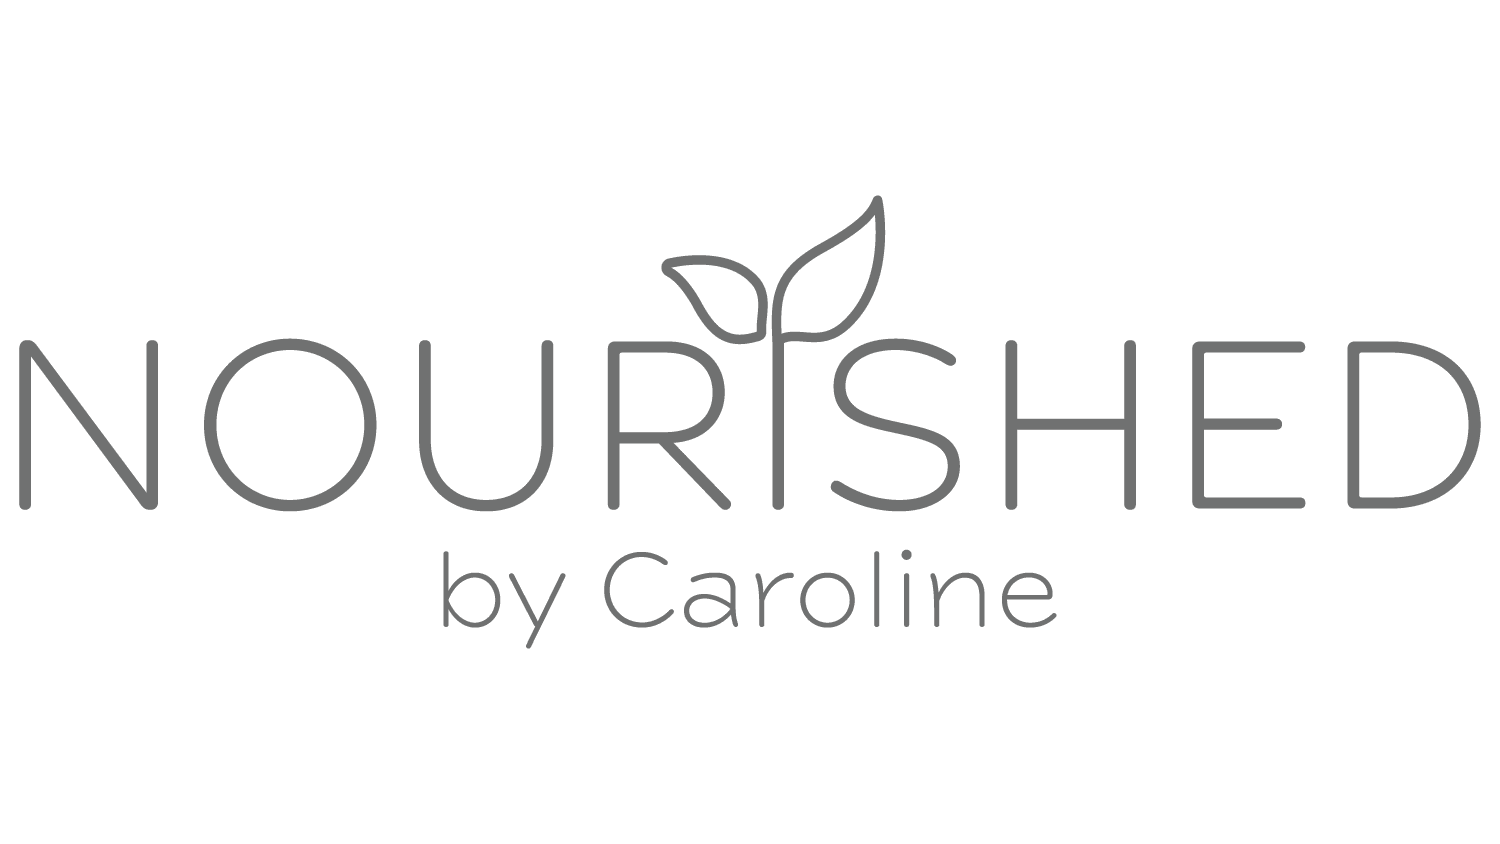 Cover Image for Nourished by Caroline